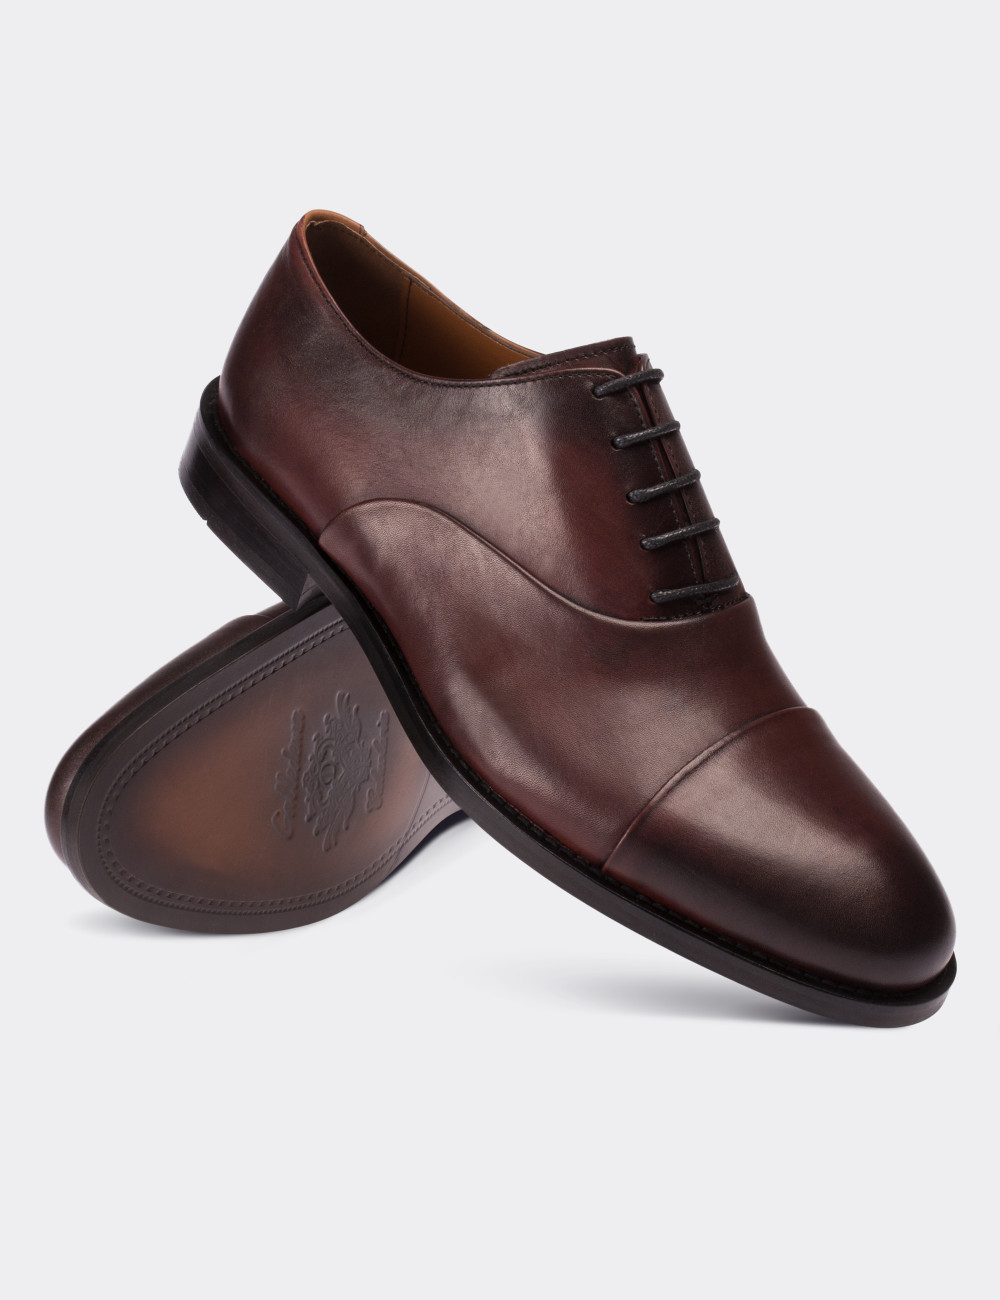 Burgundy  Leather Classic Shoes - 01026MBRDM01